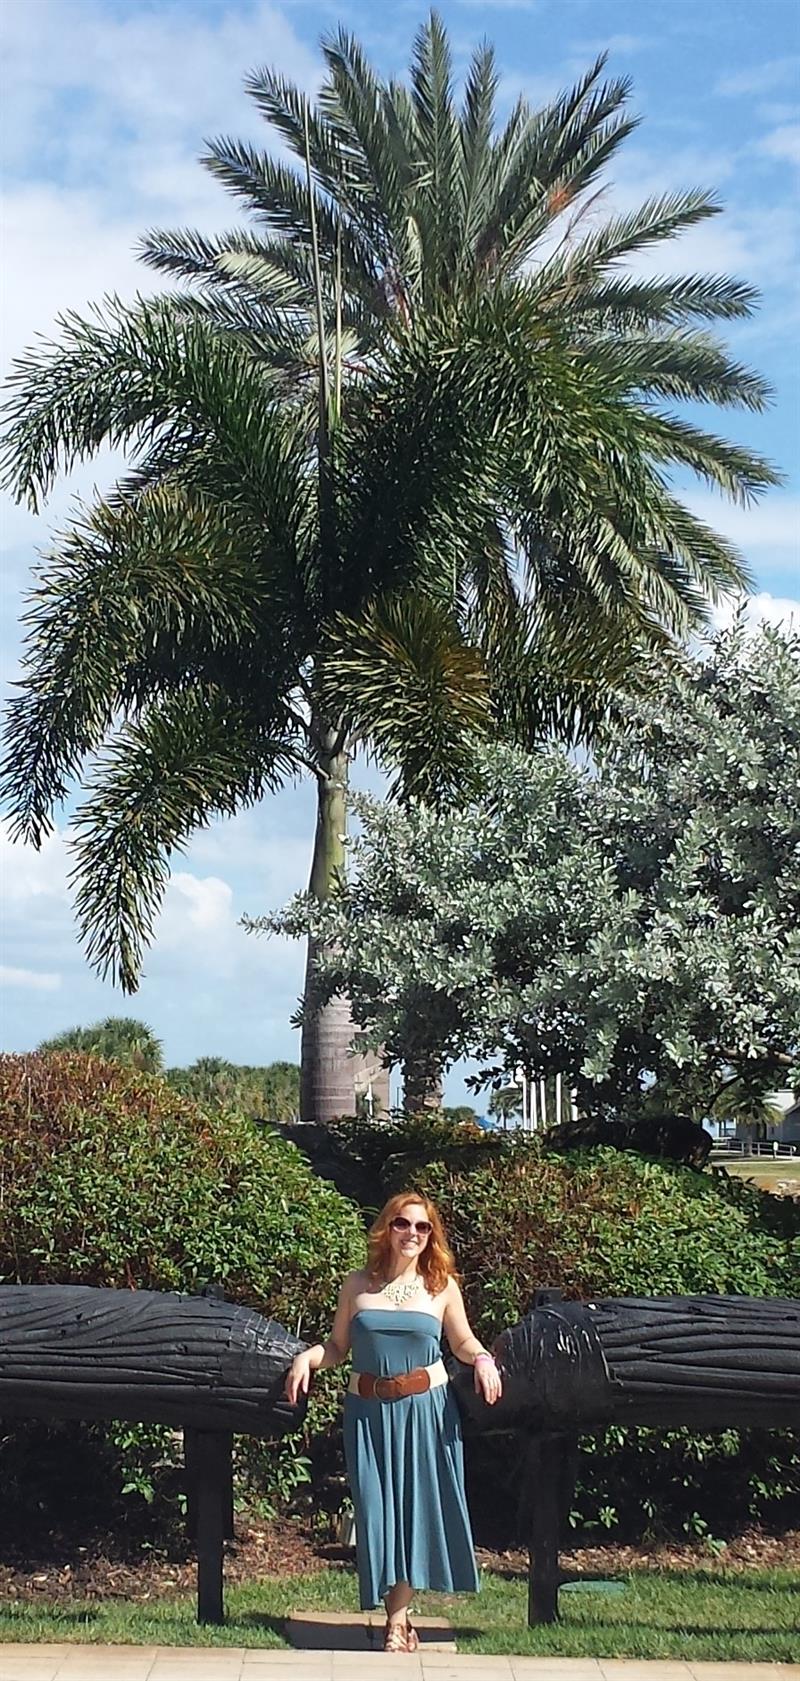 Rachael Vause standing in front of a palm tree